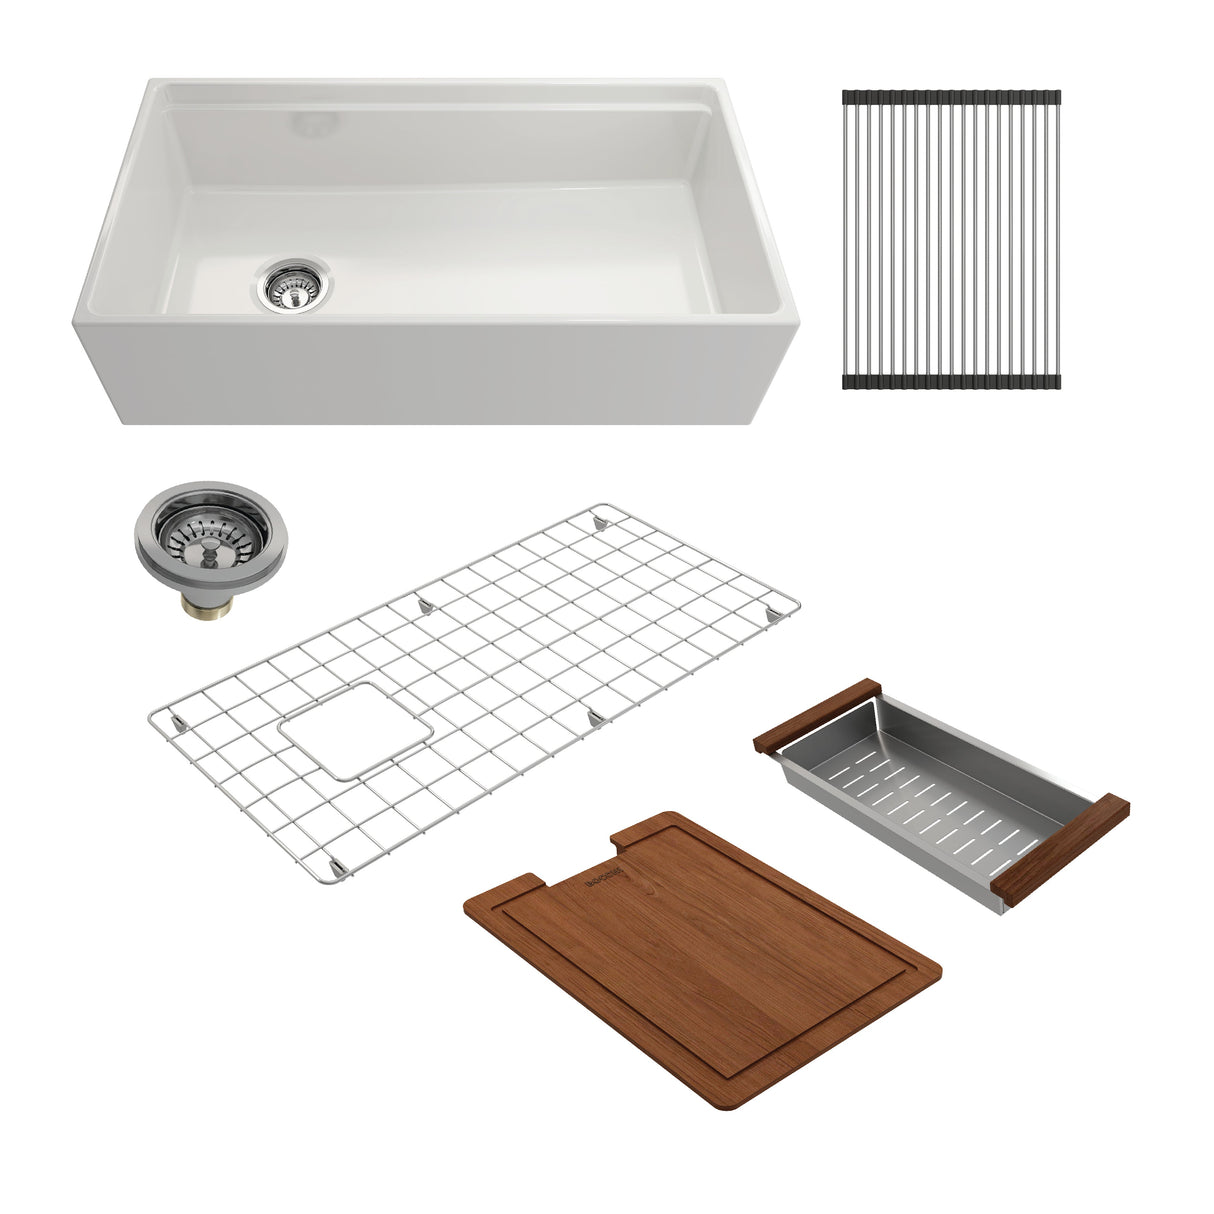 BOCCHI 1505-001-2020CH Kit: 1505 Contempo Step-Rim Apron Front Fireclay 36 in. Single Bowl Kitchen Sink with Integrated Work Station & Accessories w/ Livenza 2.0 Faucet